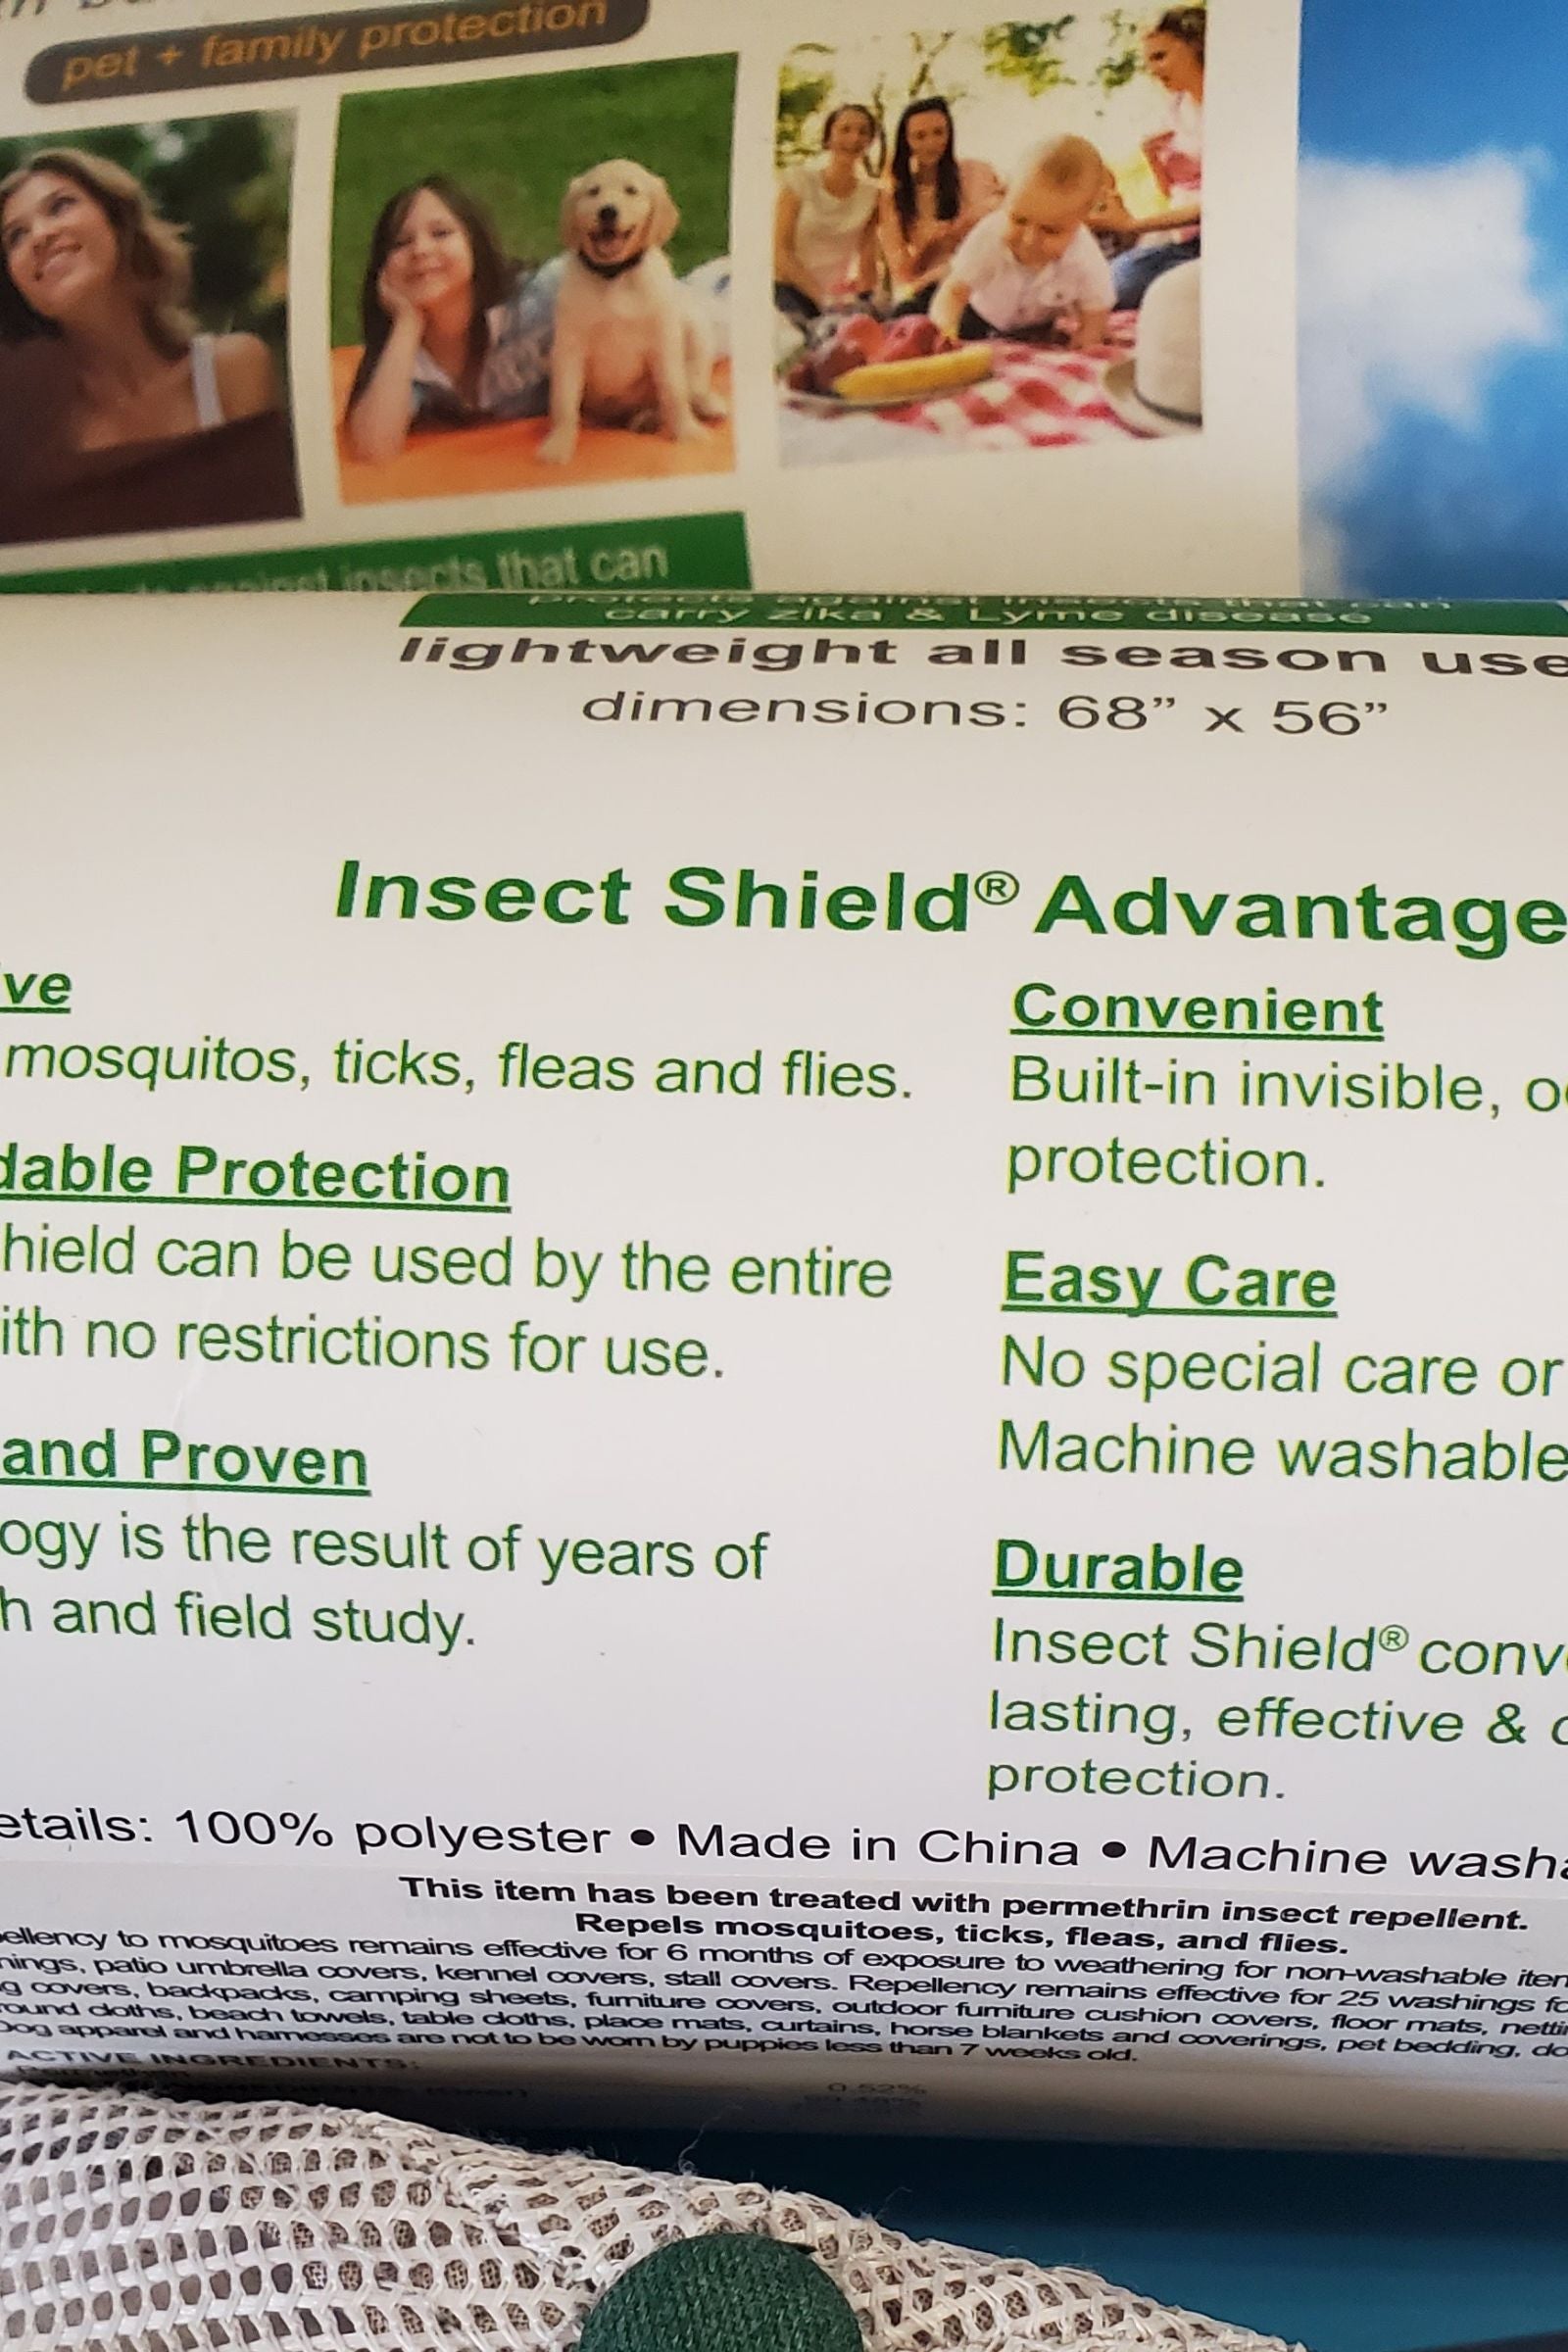 Insect Shield Red Protection Blanket